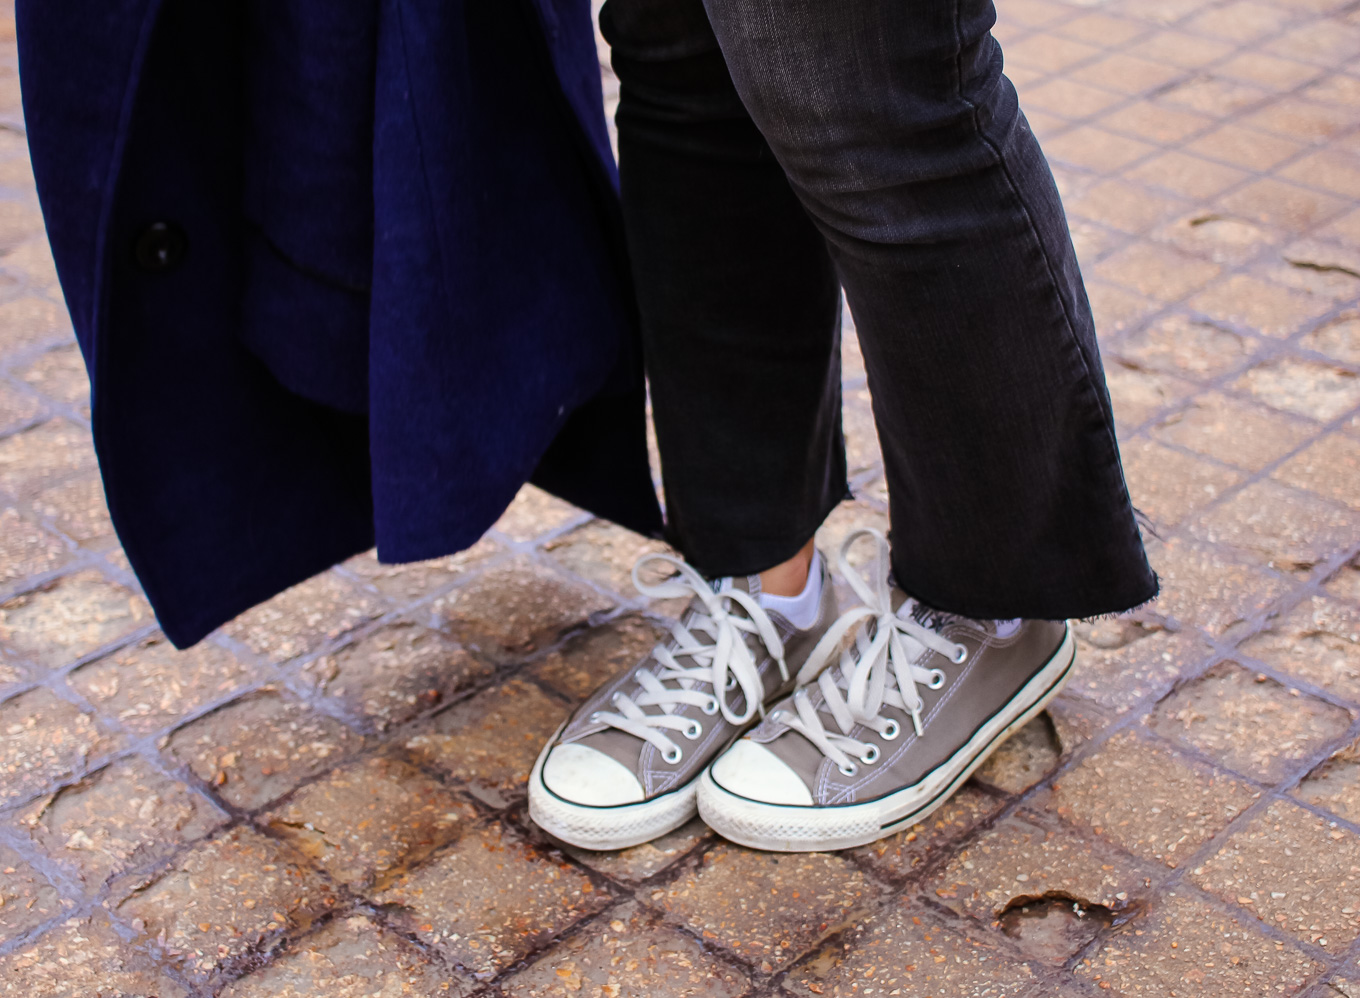 Lifestyle blogger Roxanne of Glass of Glam wearing a Madewell cropped denim, Madewell sweater, converse, a Goyard handbag, and a blue peacoat - Ain't No Party Like A Cropped Denim Party by popular Chicago fashion blogger Glass of Glam